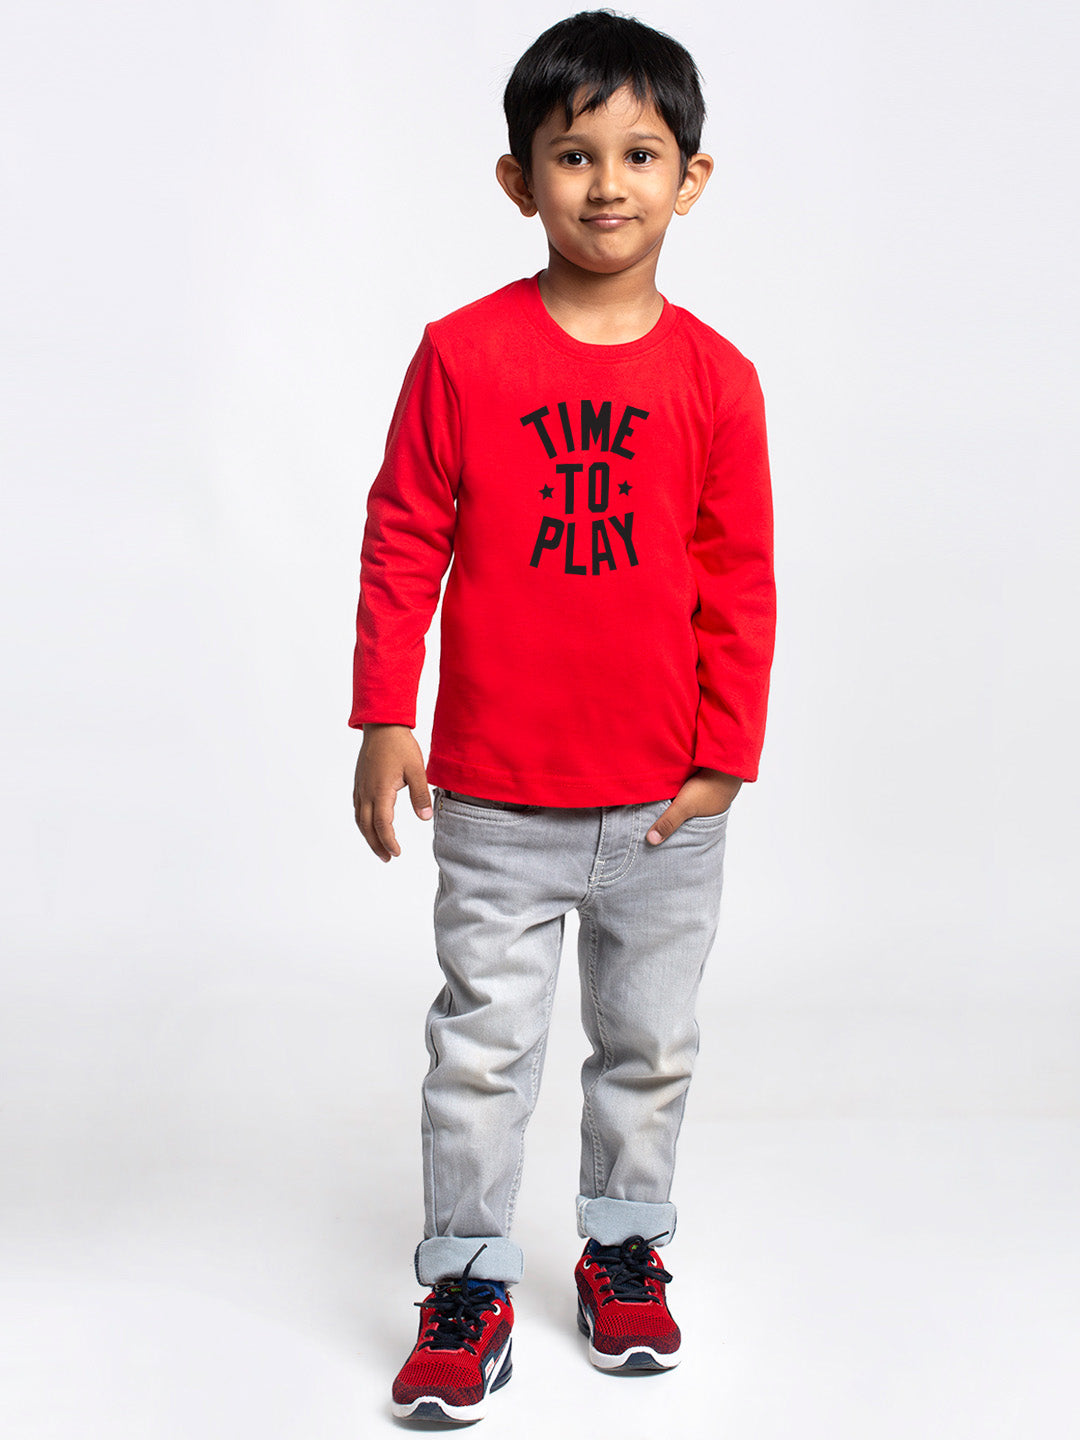 Kids Time To Play printed full sleeves t-shirt - Friskers